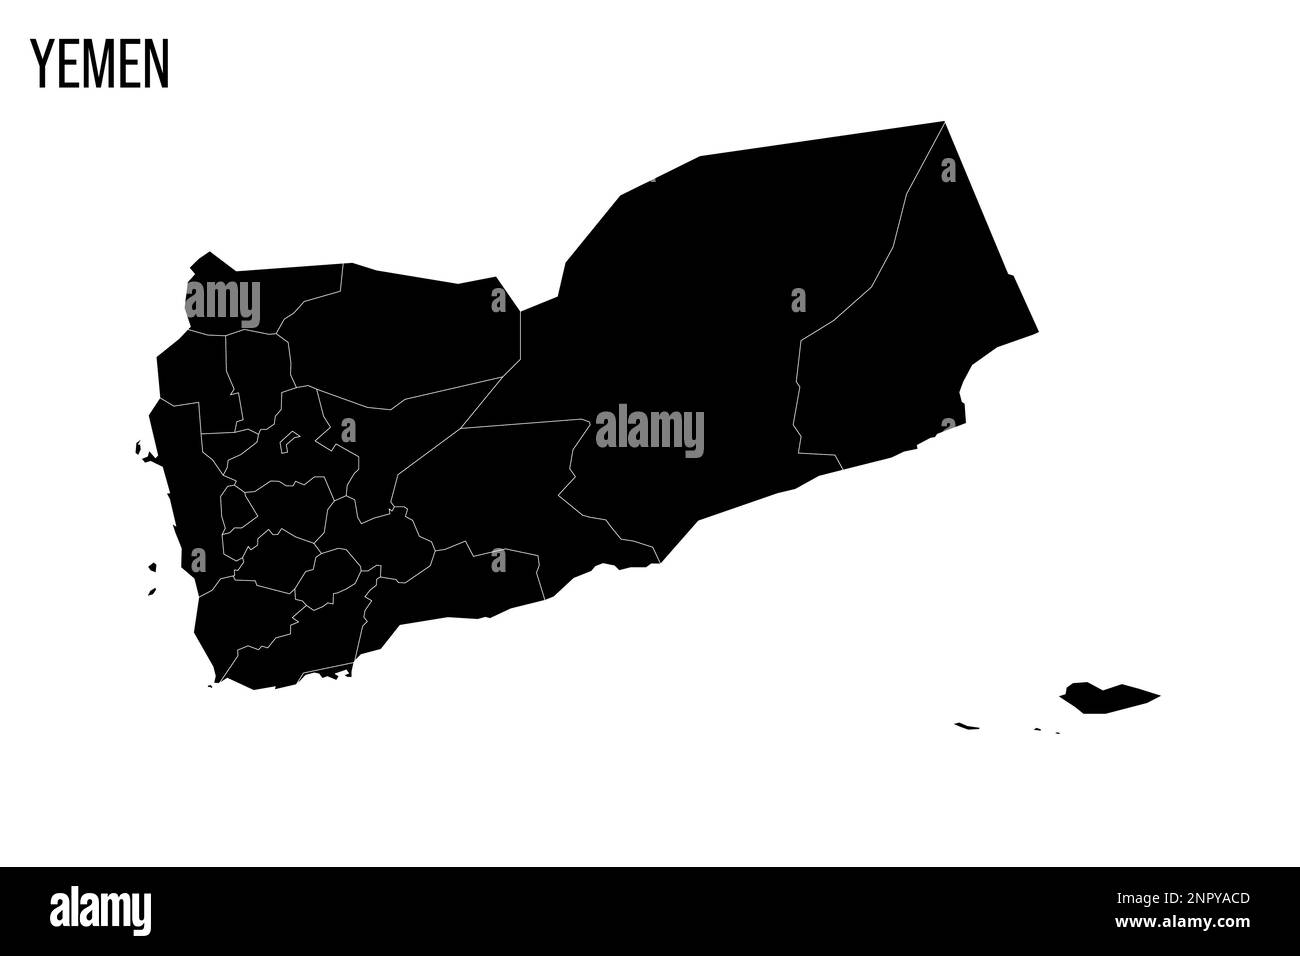 Yemen political map of administrative divisions - governorates and municipality of Sanaa. Blank black map and country name title. Stock Vector